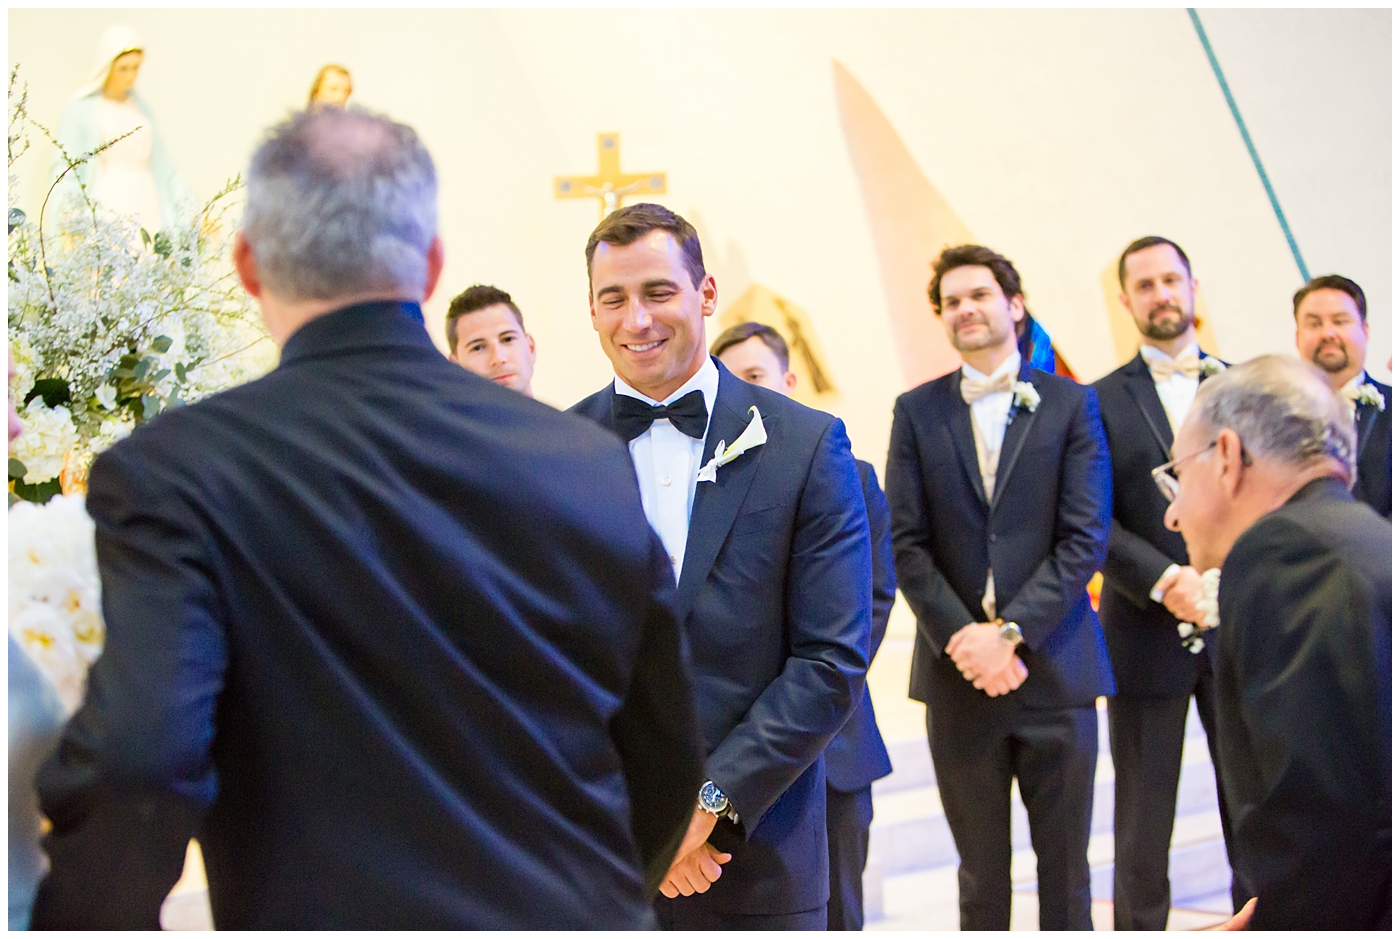 groom in navy neiman marcus and canali suit with blue bowtie with calla lilly boutonniere seeing bride walk down aisle at church wedding ceremony